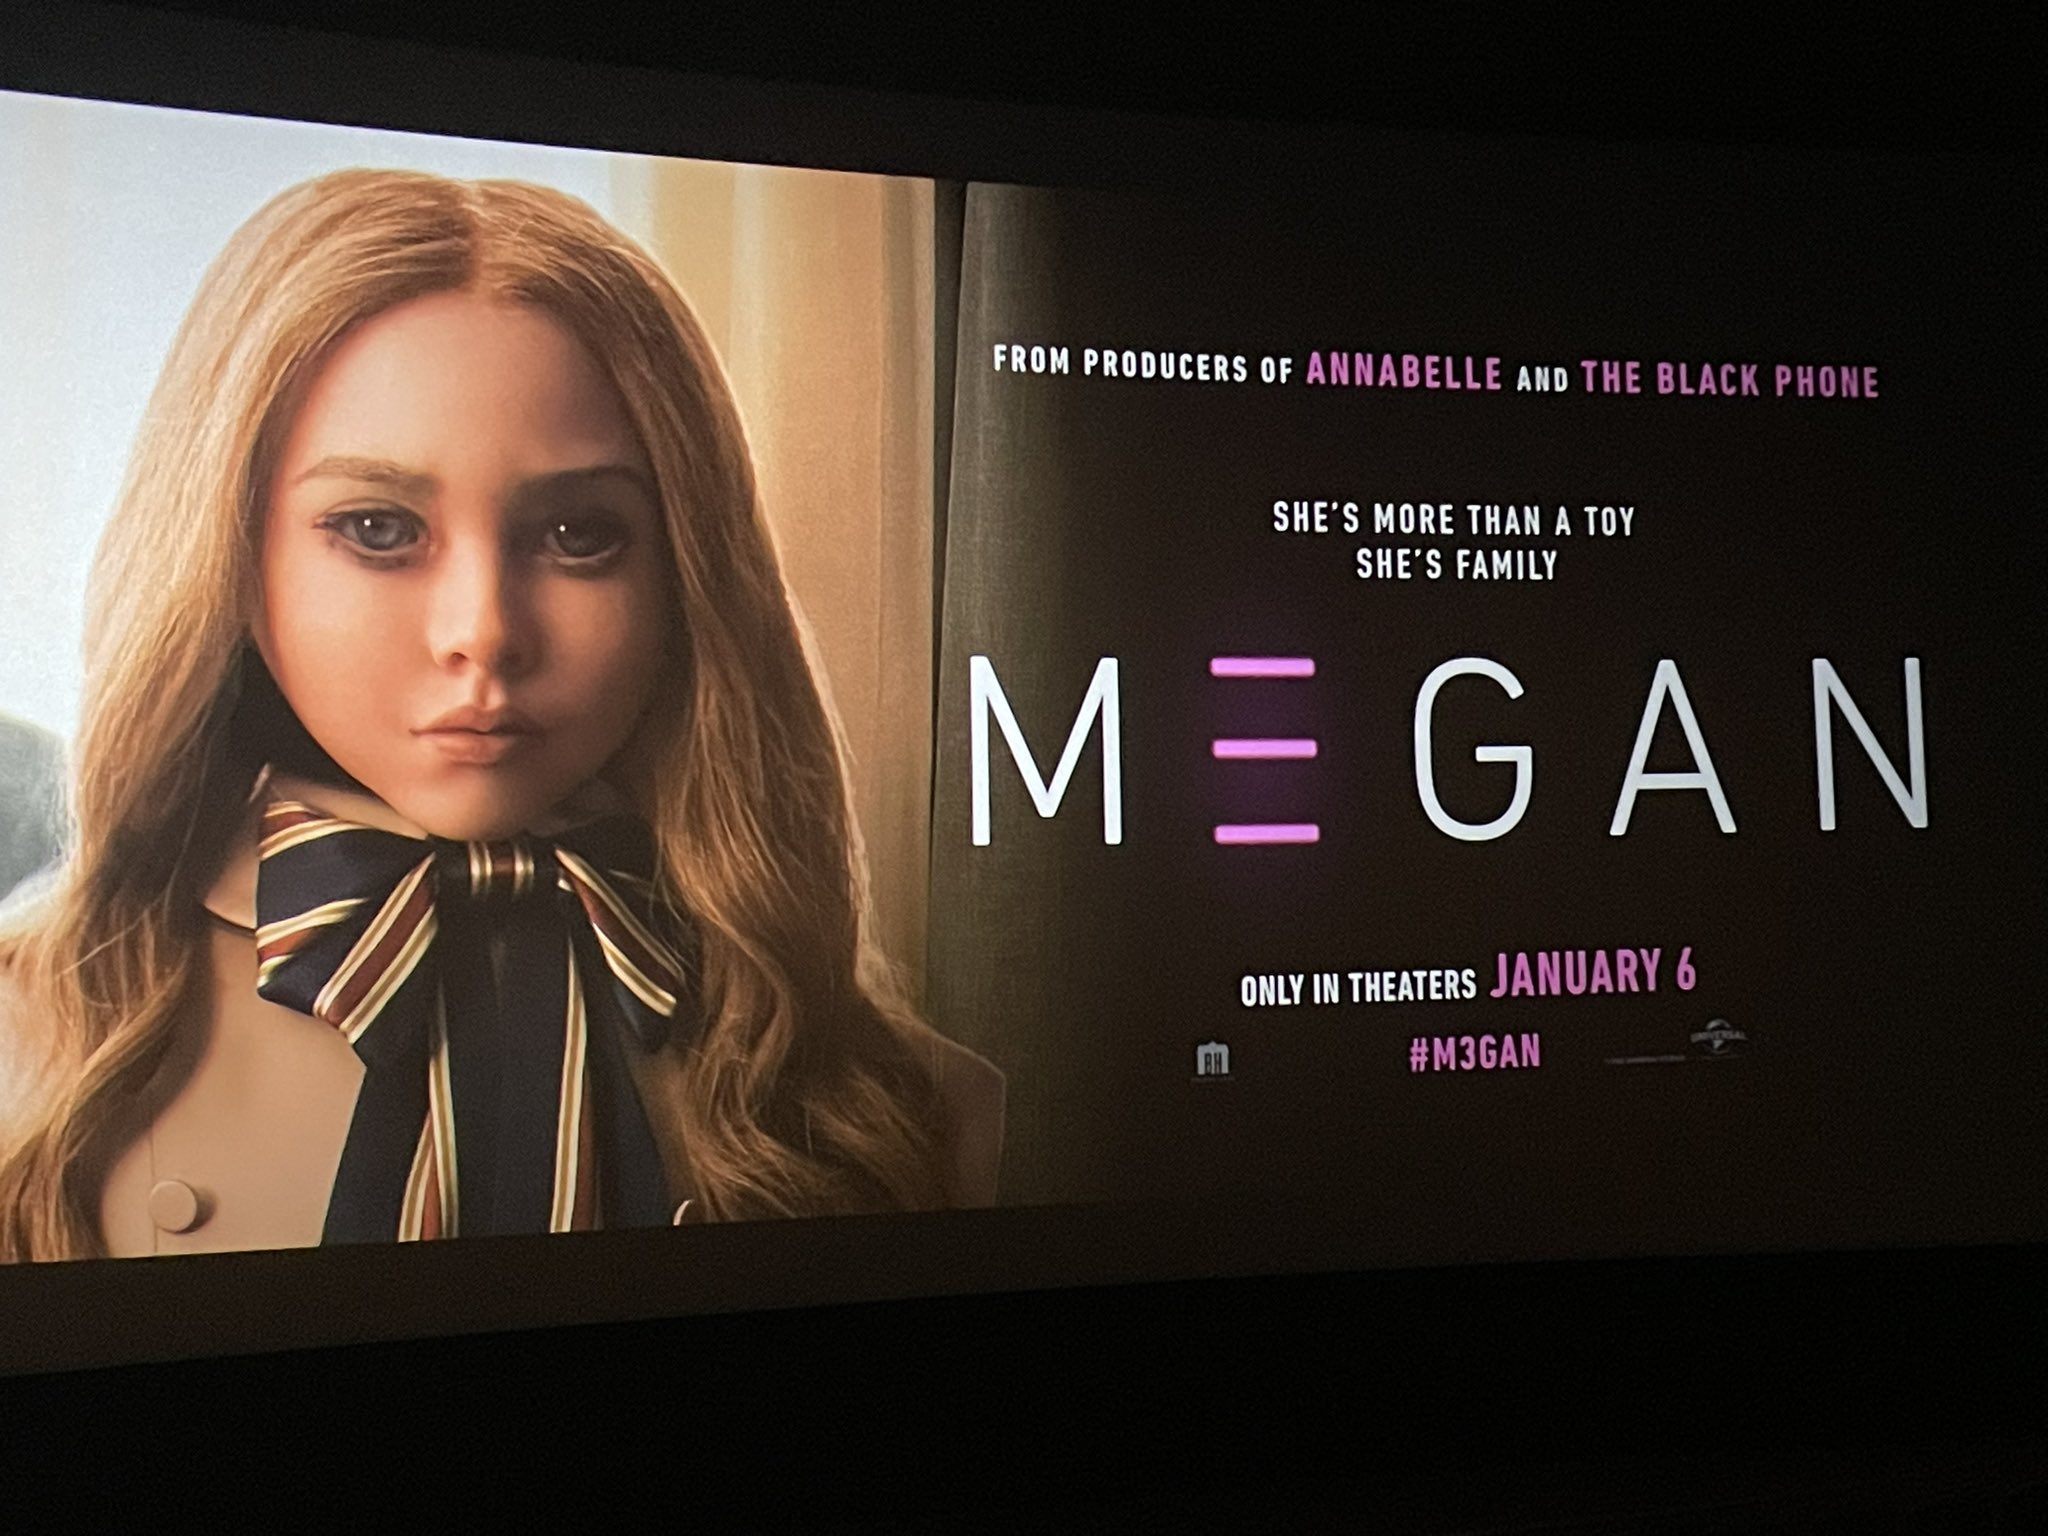 The Unfit Crit #M3gan Was A Damn Good Time At The Movies. Little Murderous Robot Had Me Rooting For Her Most Of The Movie. More Sci Fi Comedy Than Horror, Imo, But